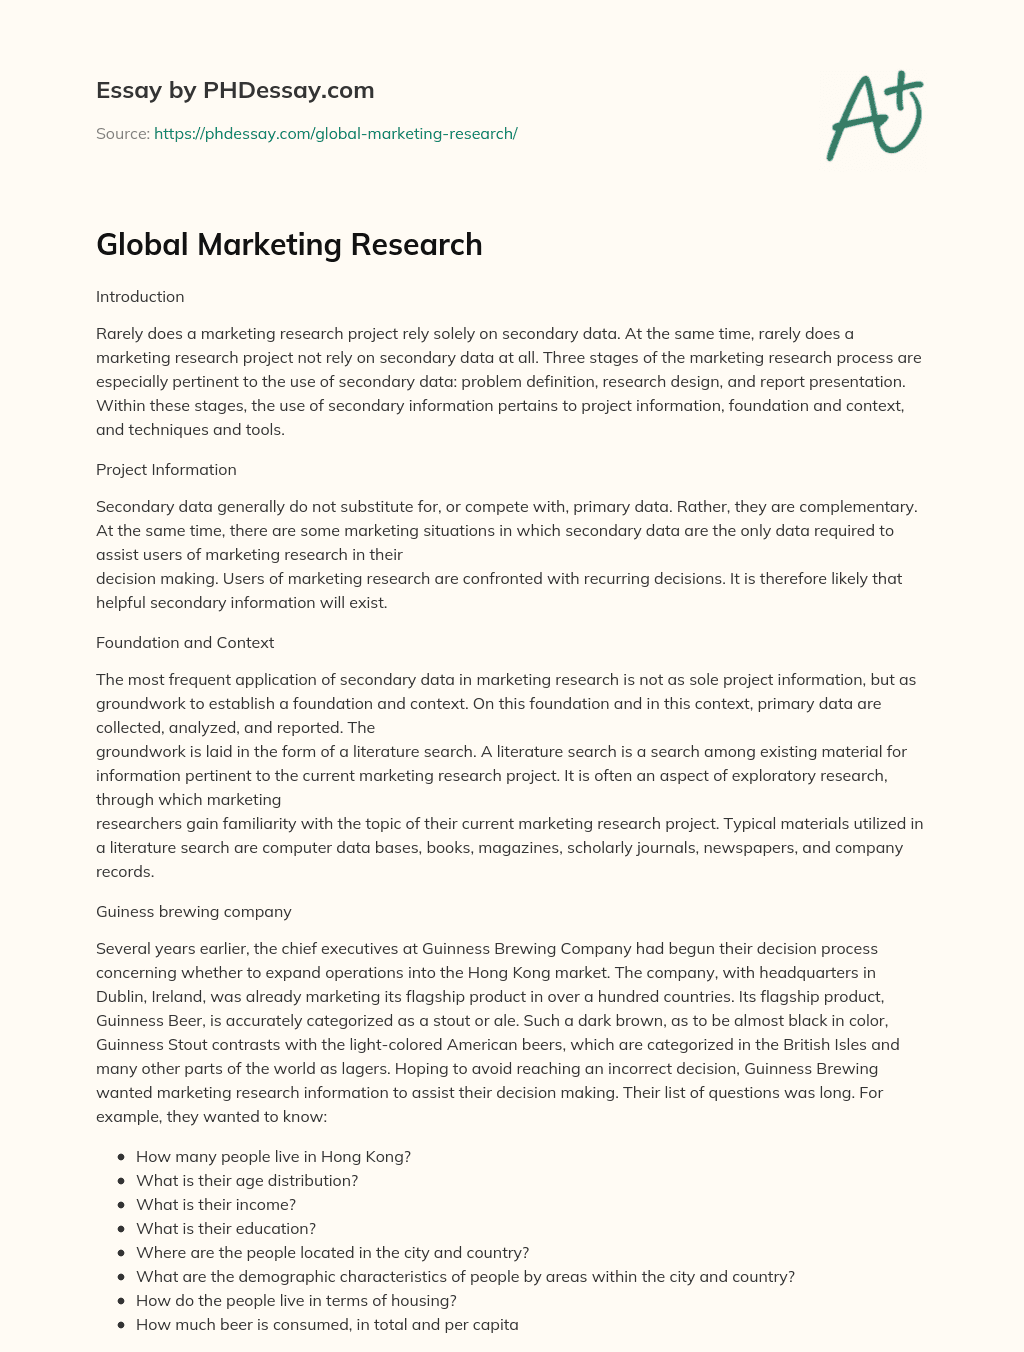 Global Marketing Research essay